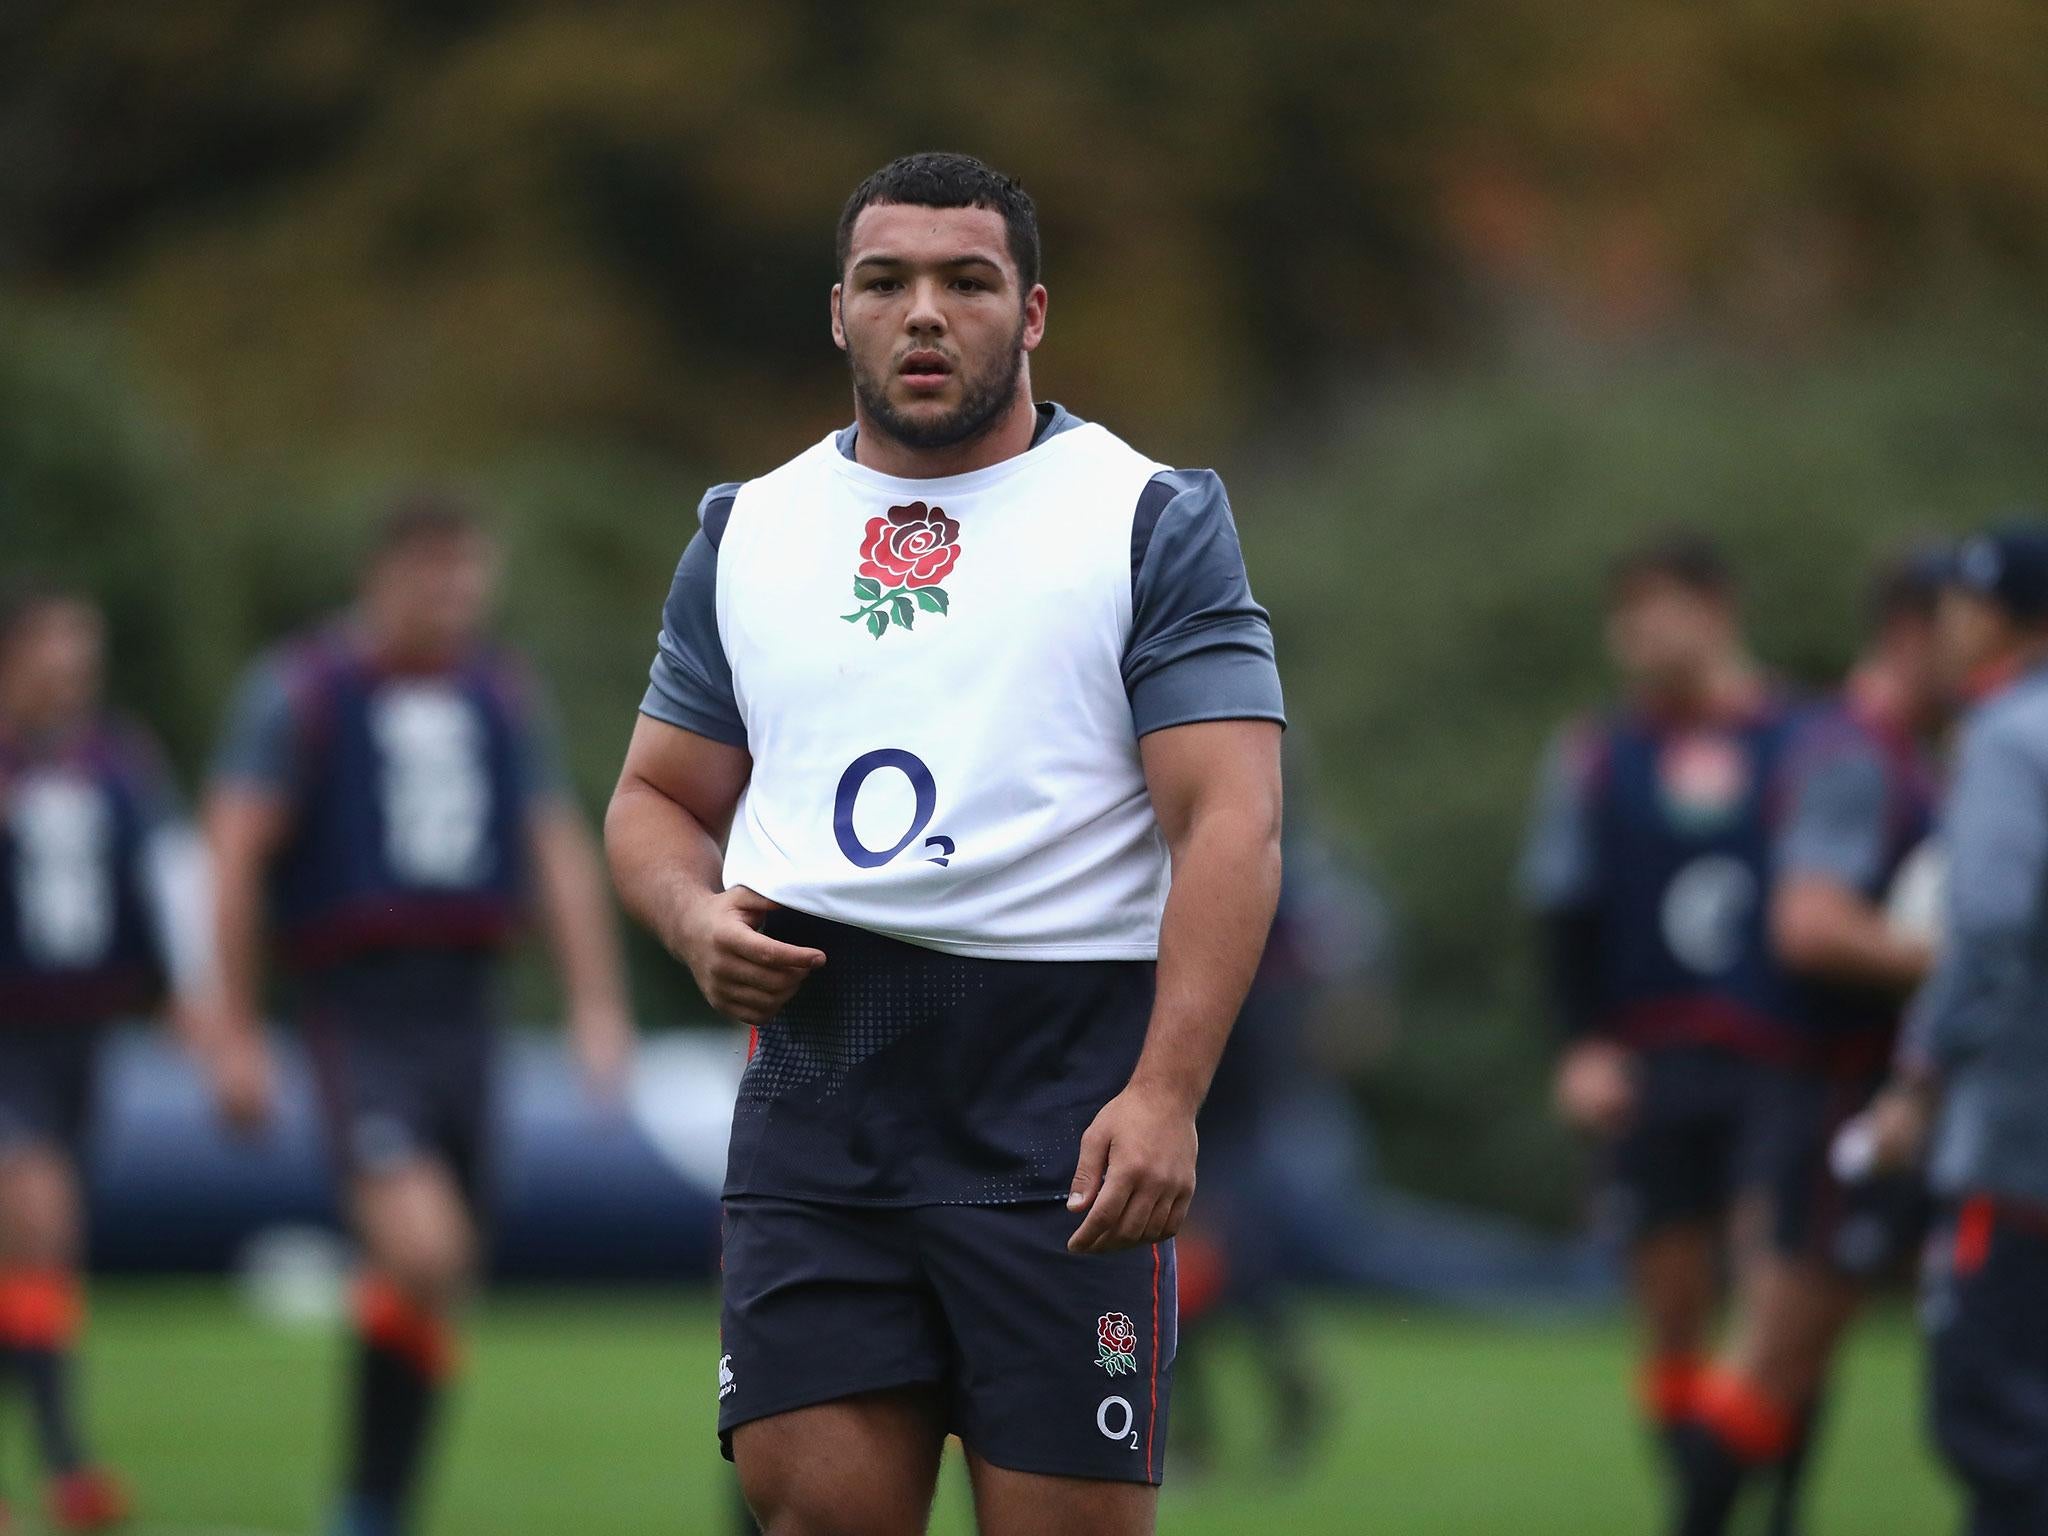 Ellis Genge has been included in England's Six Nations squad